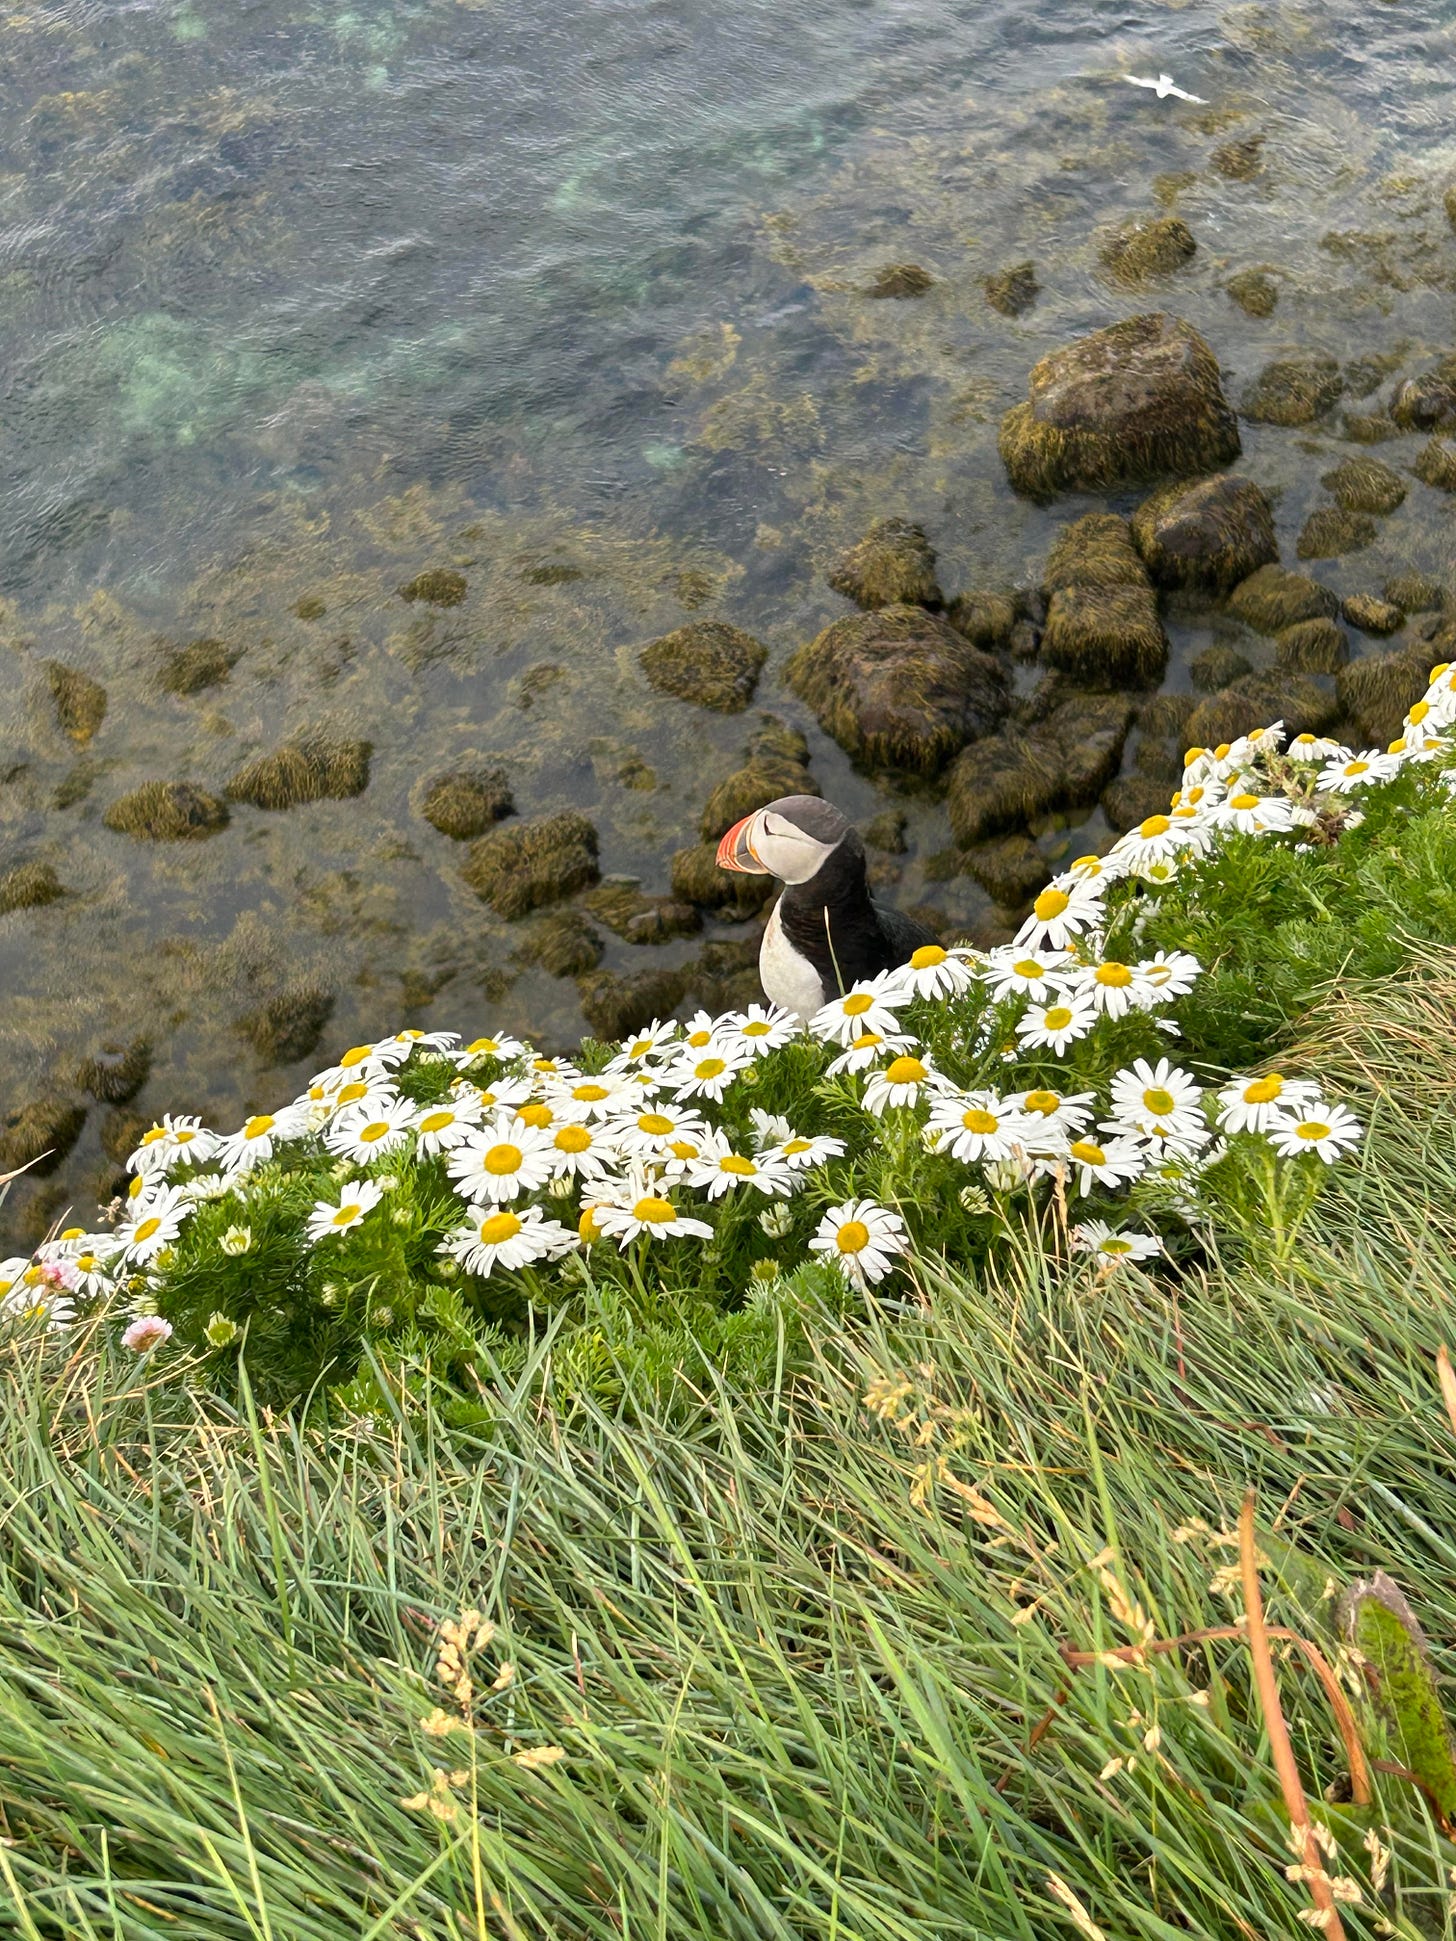 A puffin, perched in a bed of daisies on a sea cliff, overlooks the North Atlantic Ocean in Iceland